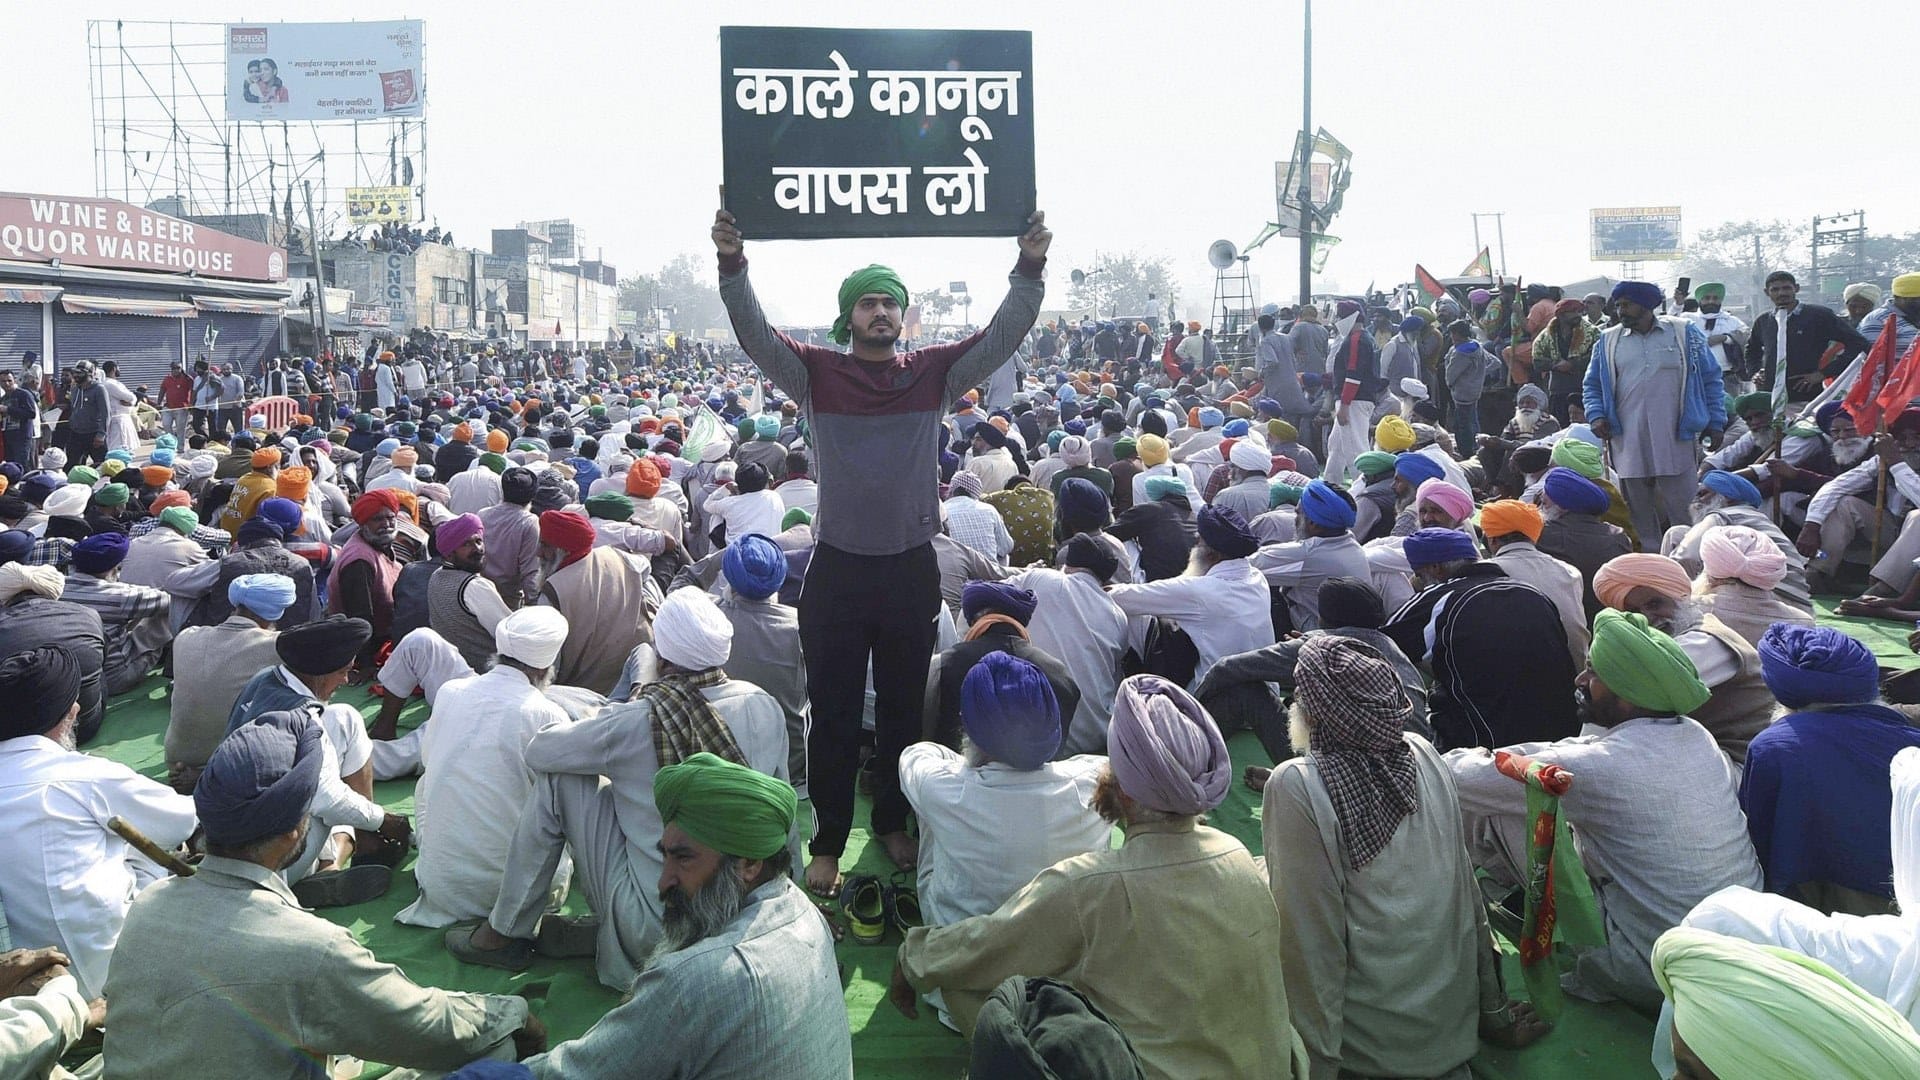 Farm protest: Govt says no record of farmers' deaths